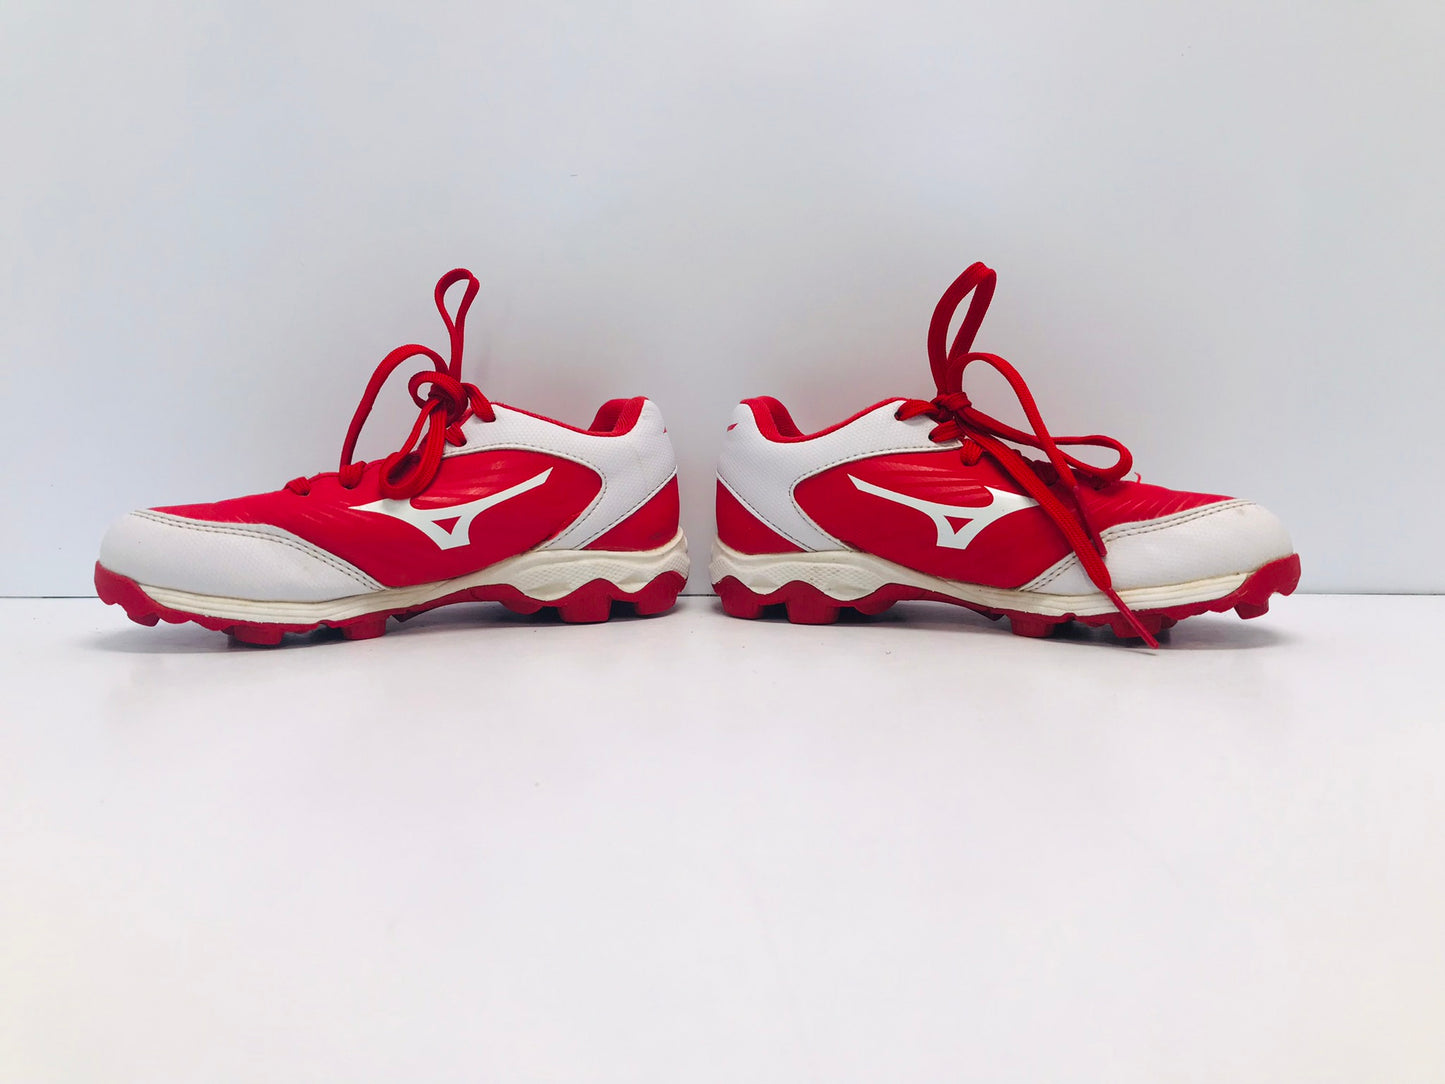 Baseball Shoes Cleats Child Size 1 Red White Excellent